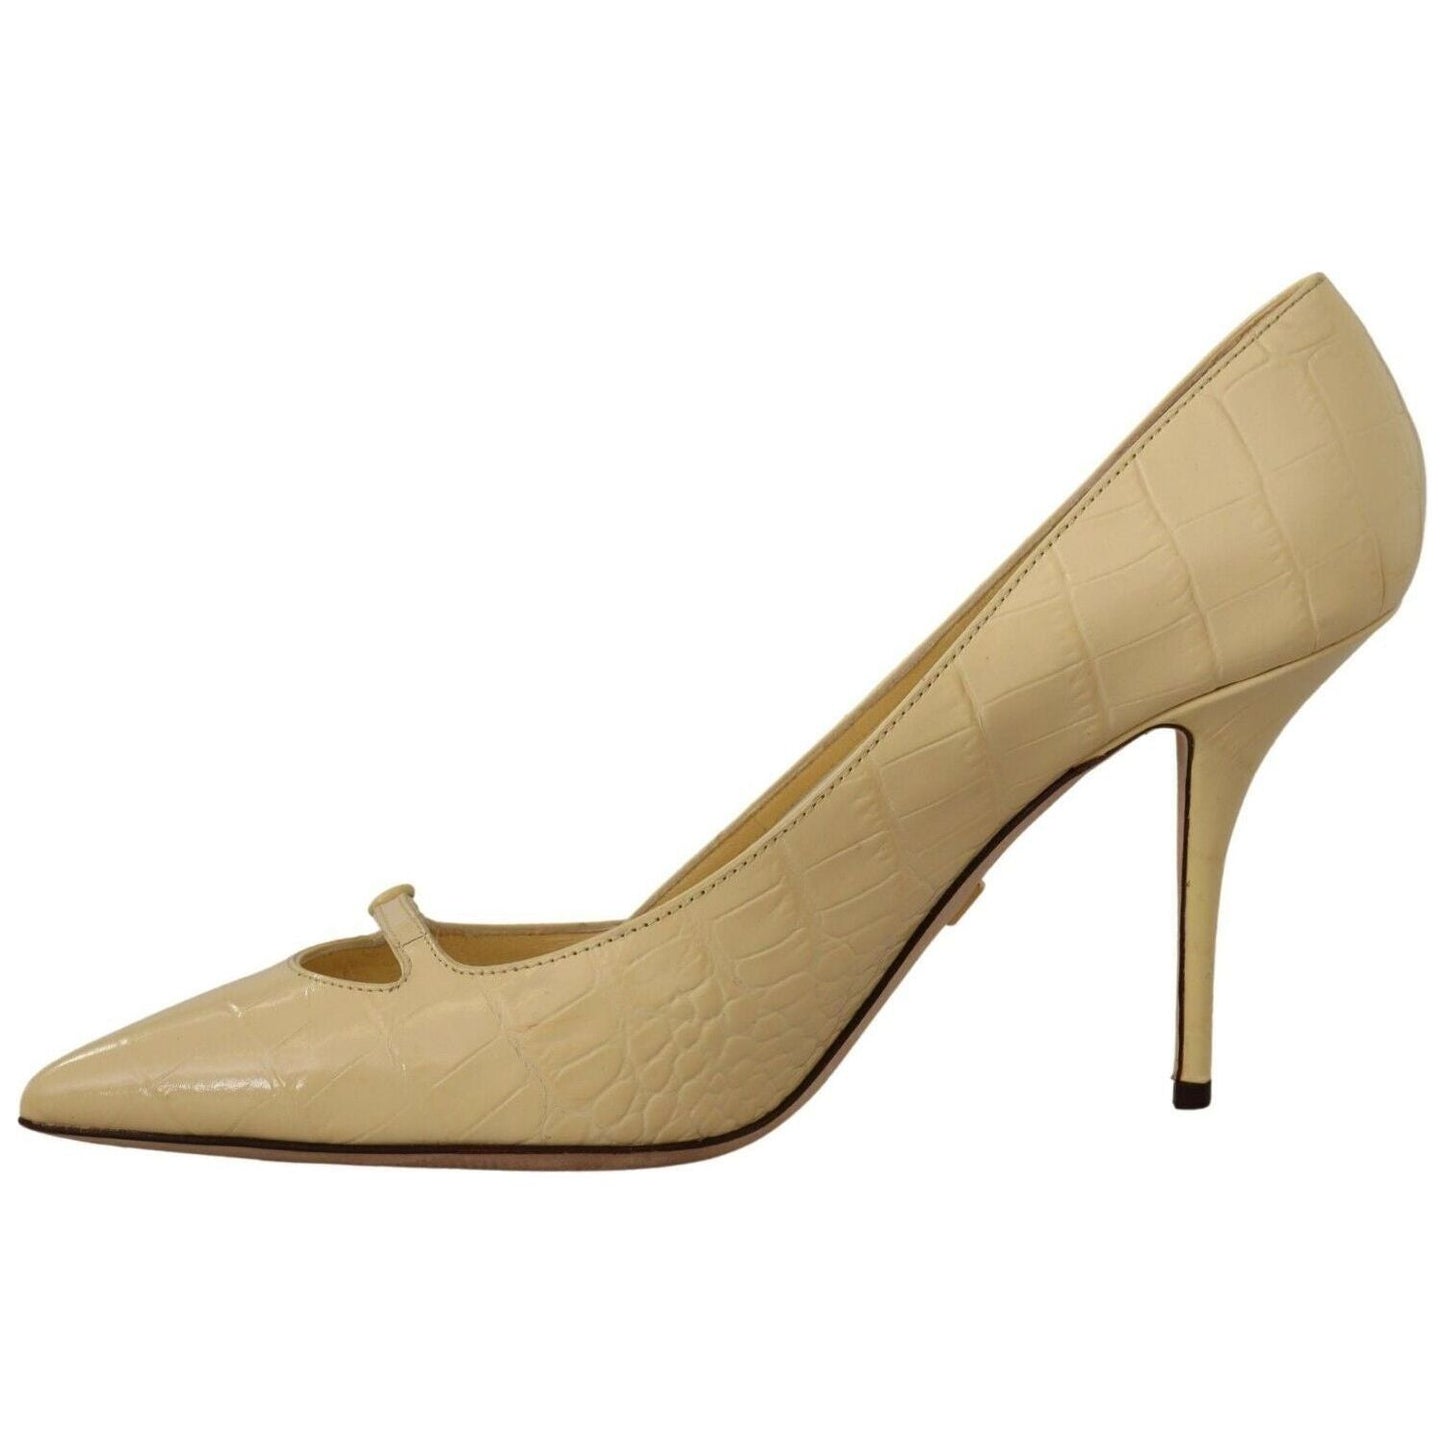 Dolce & Gabbana Chic Pointed Toe Leather Pumps in Sunshine Yellow yellow-exotic-leather-stiletto-heel-pumps-shoes s-l1600-4-48-7765b4fb-dae.jpg